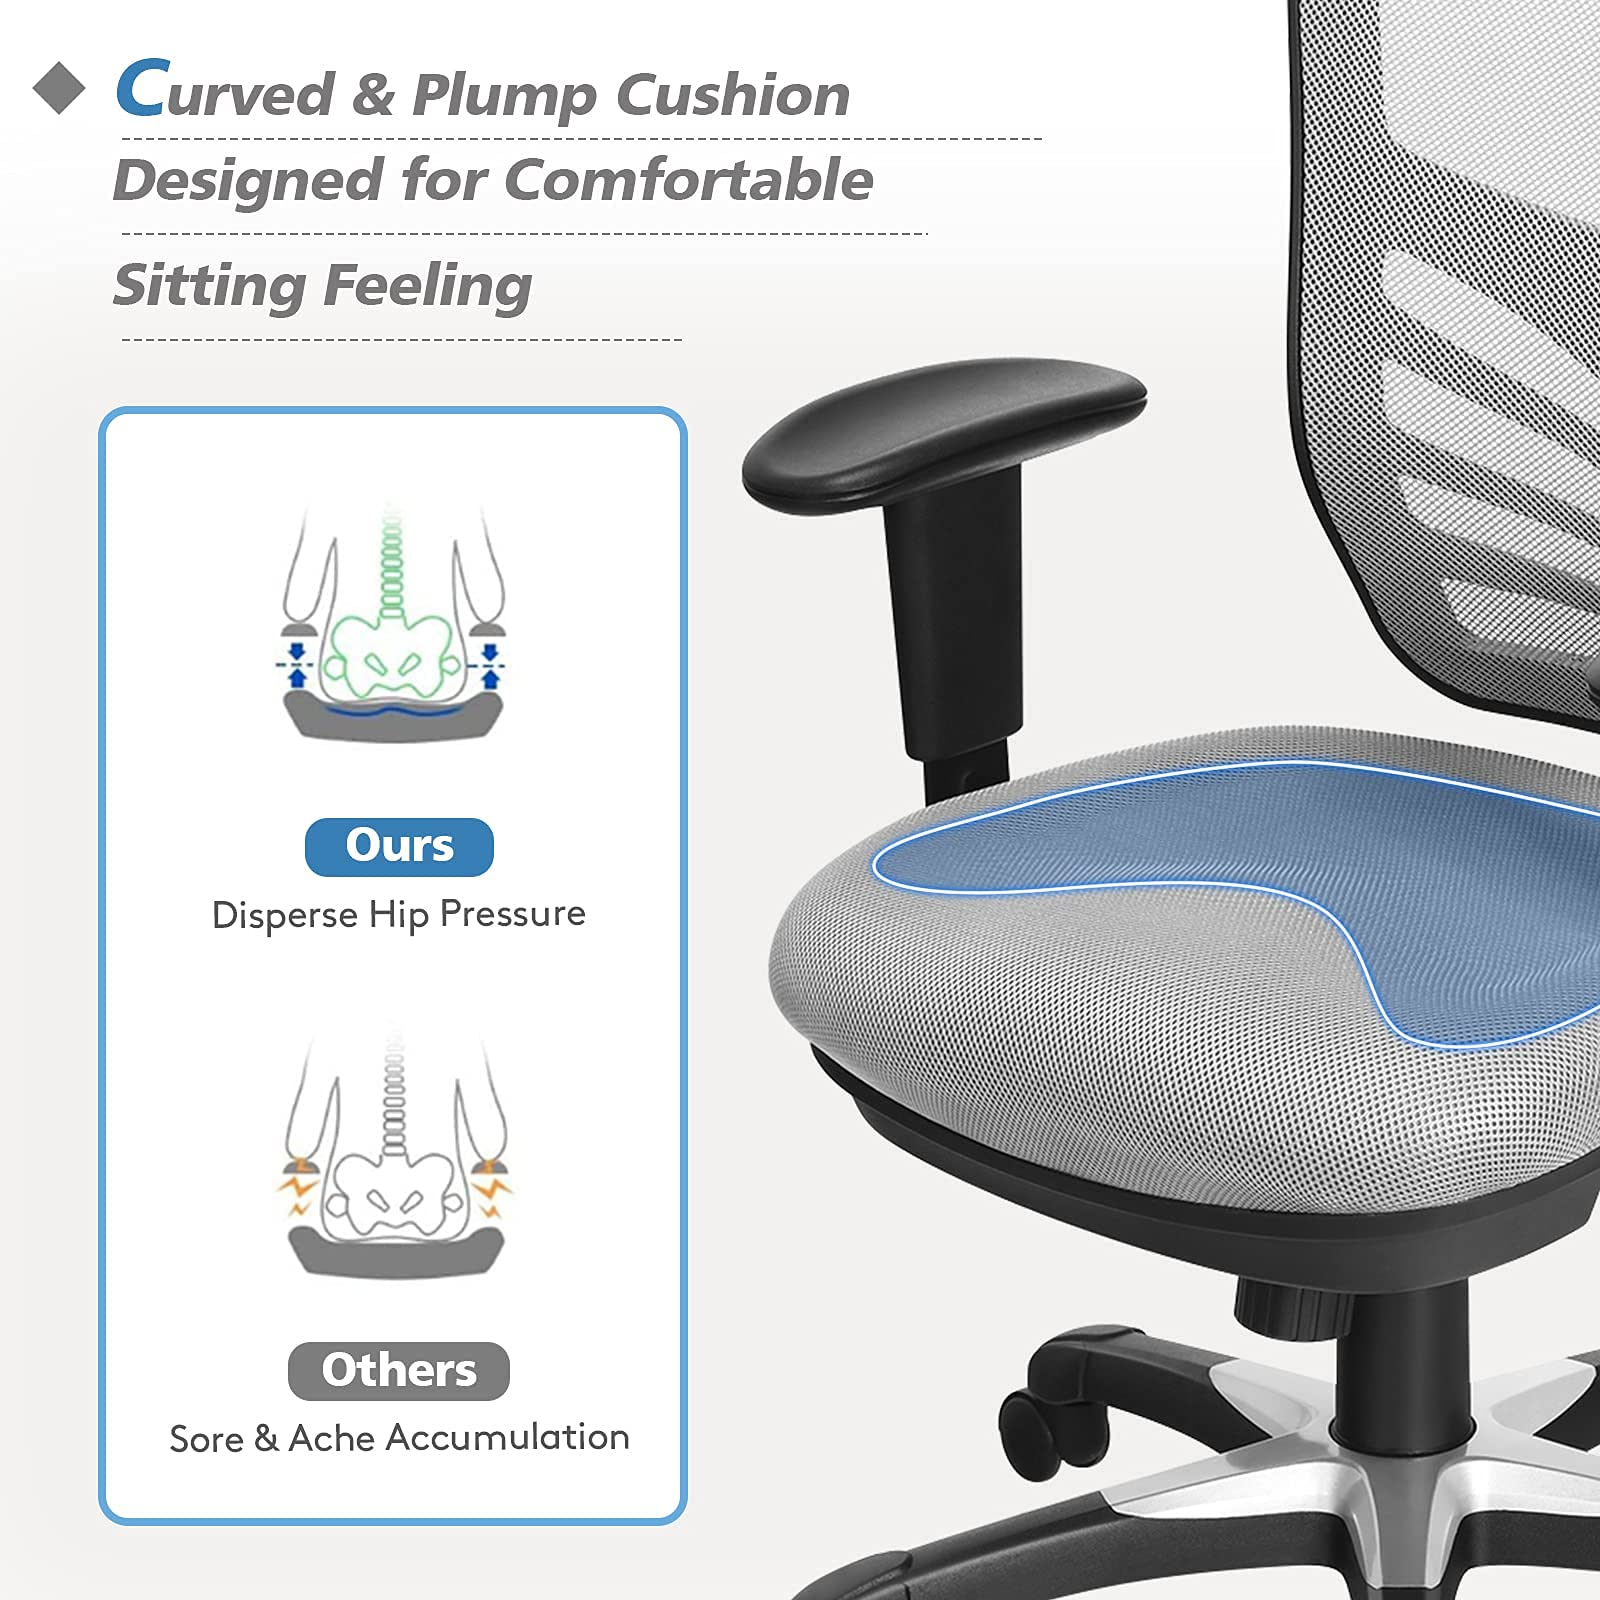 Giantex Seat Tilt Adjustment Office Chair for Working Studying Gaming